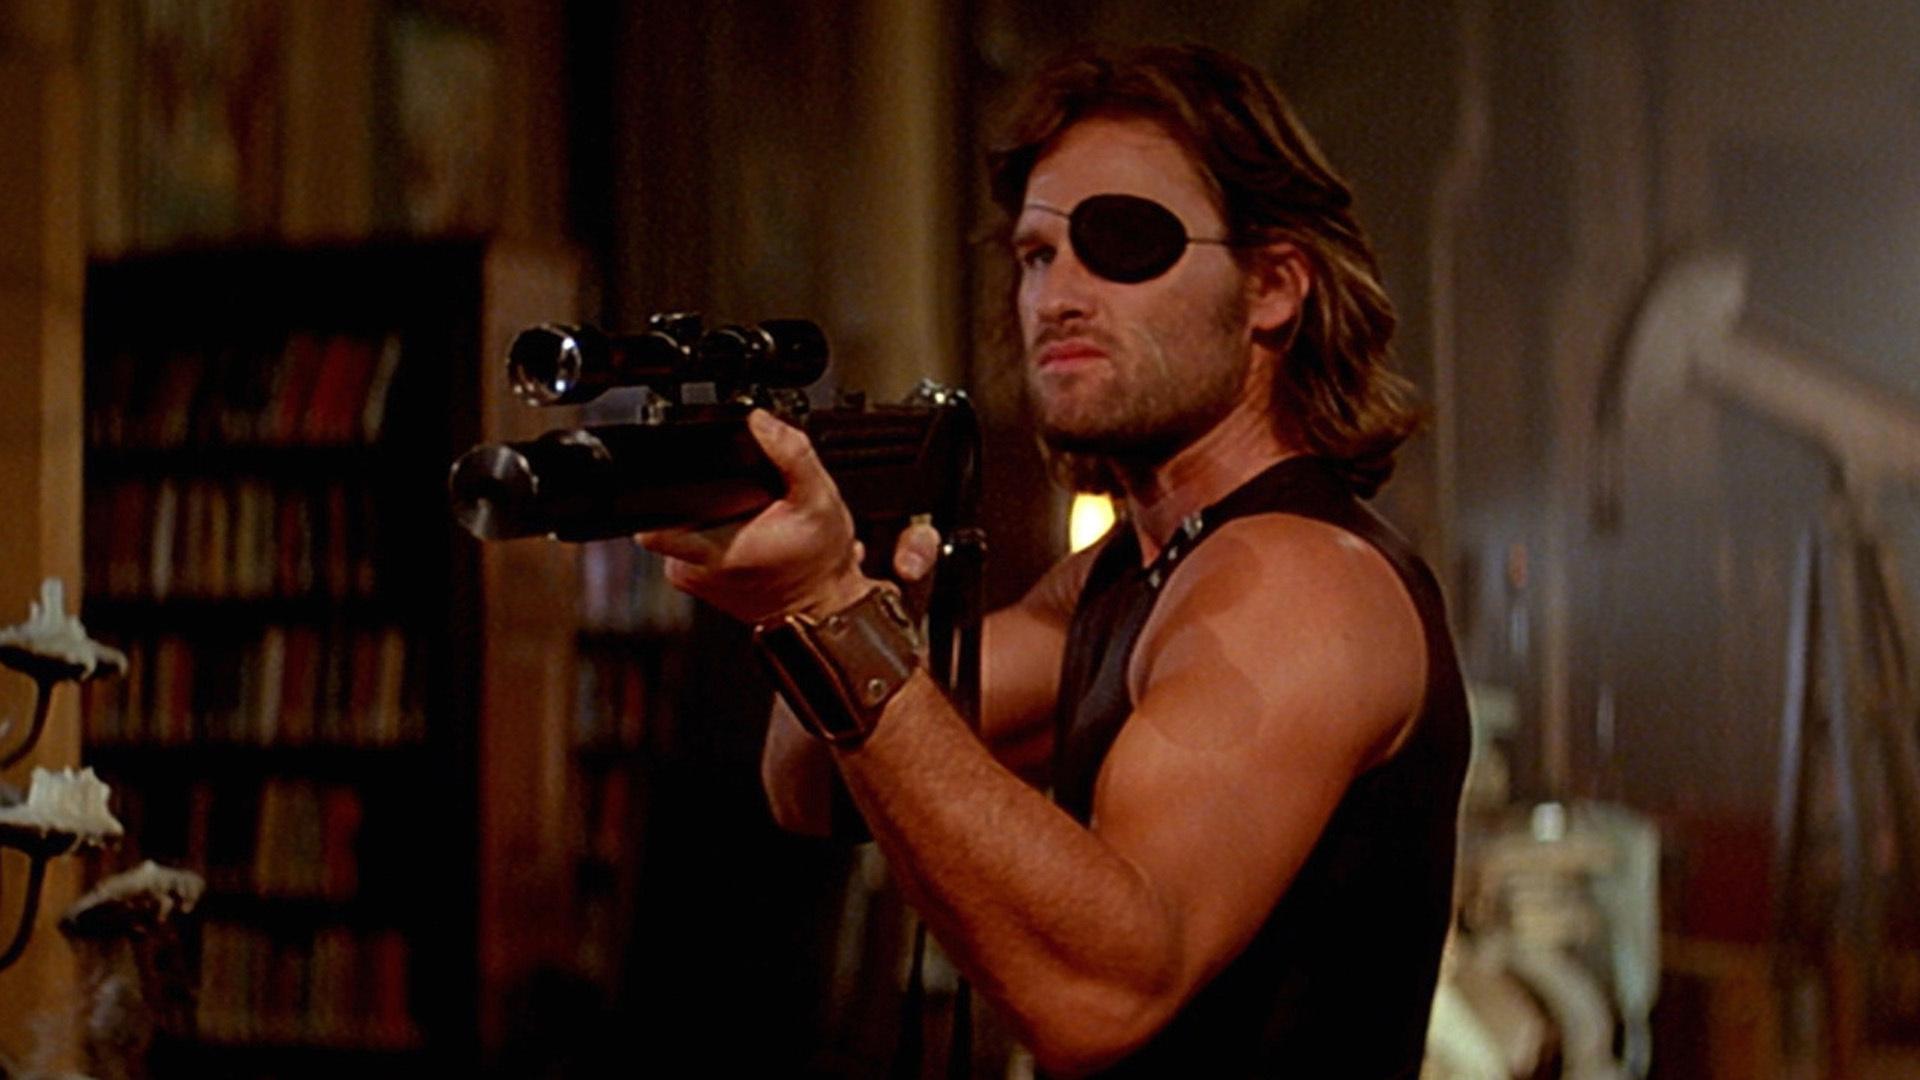 Kurt Russell Wallpaper High Resolution and Quality Download